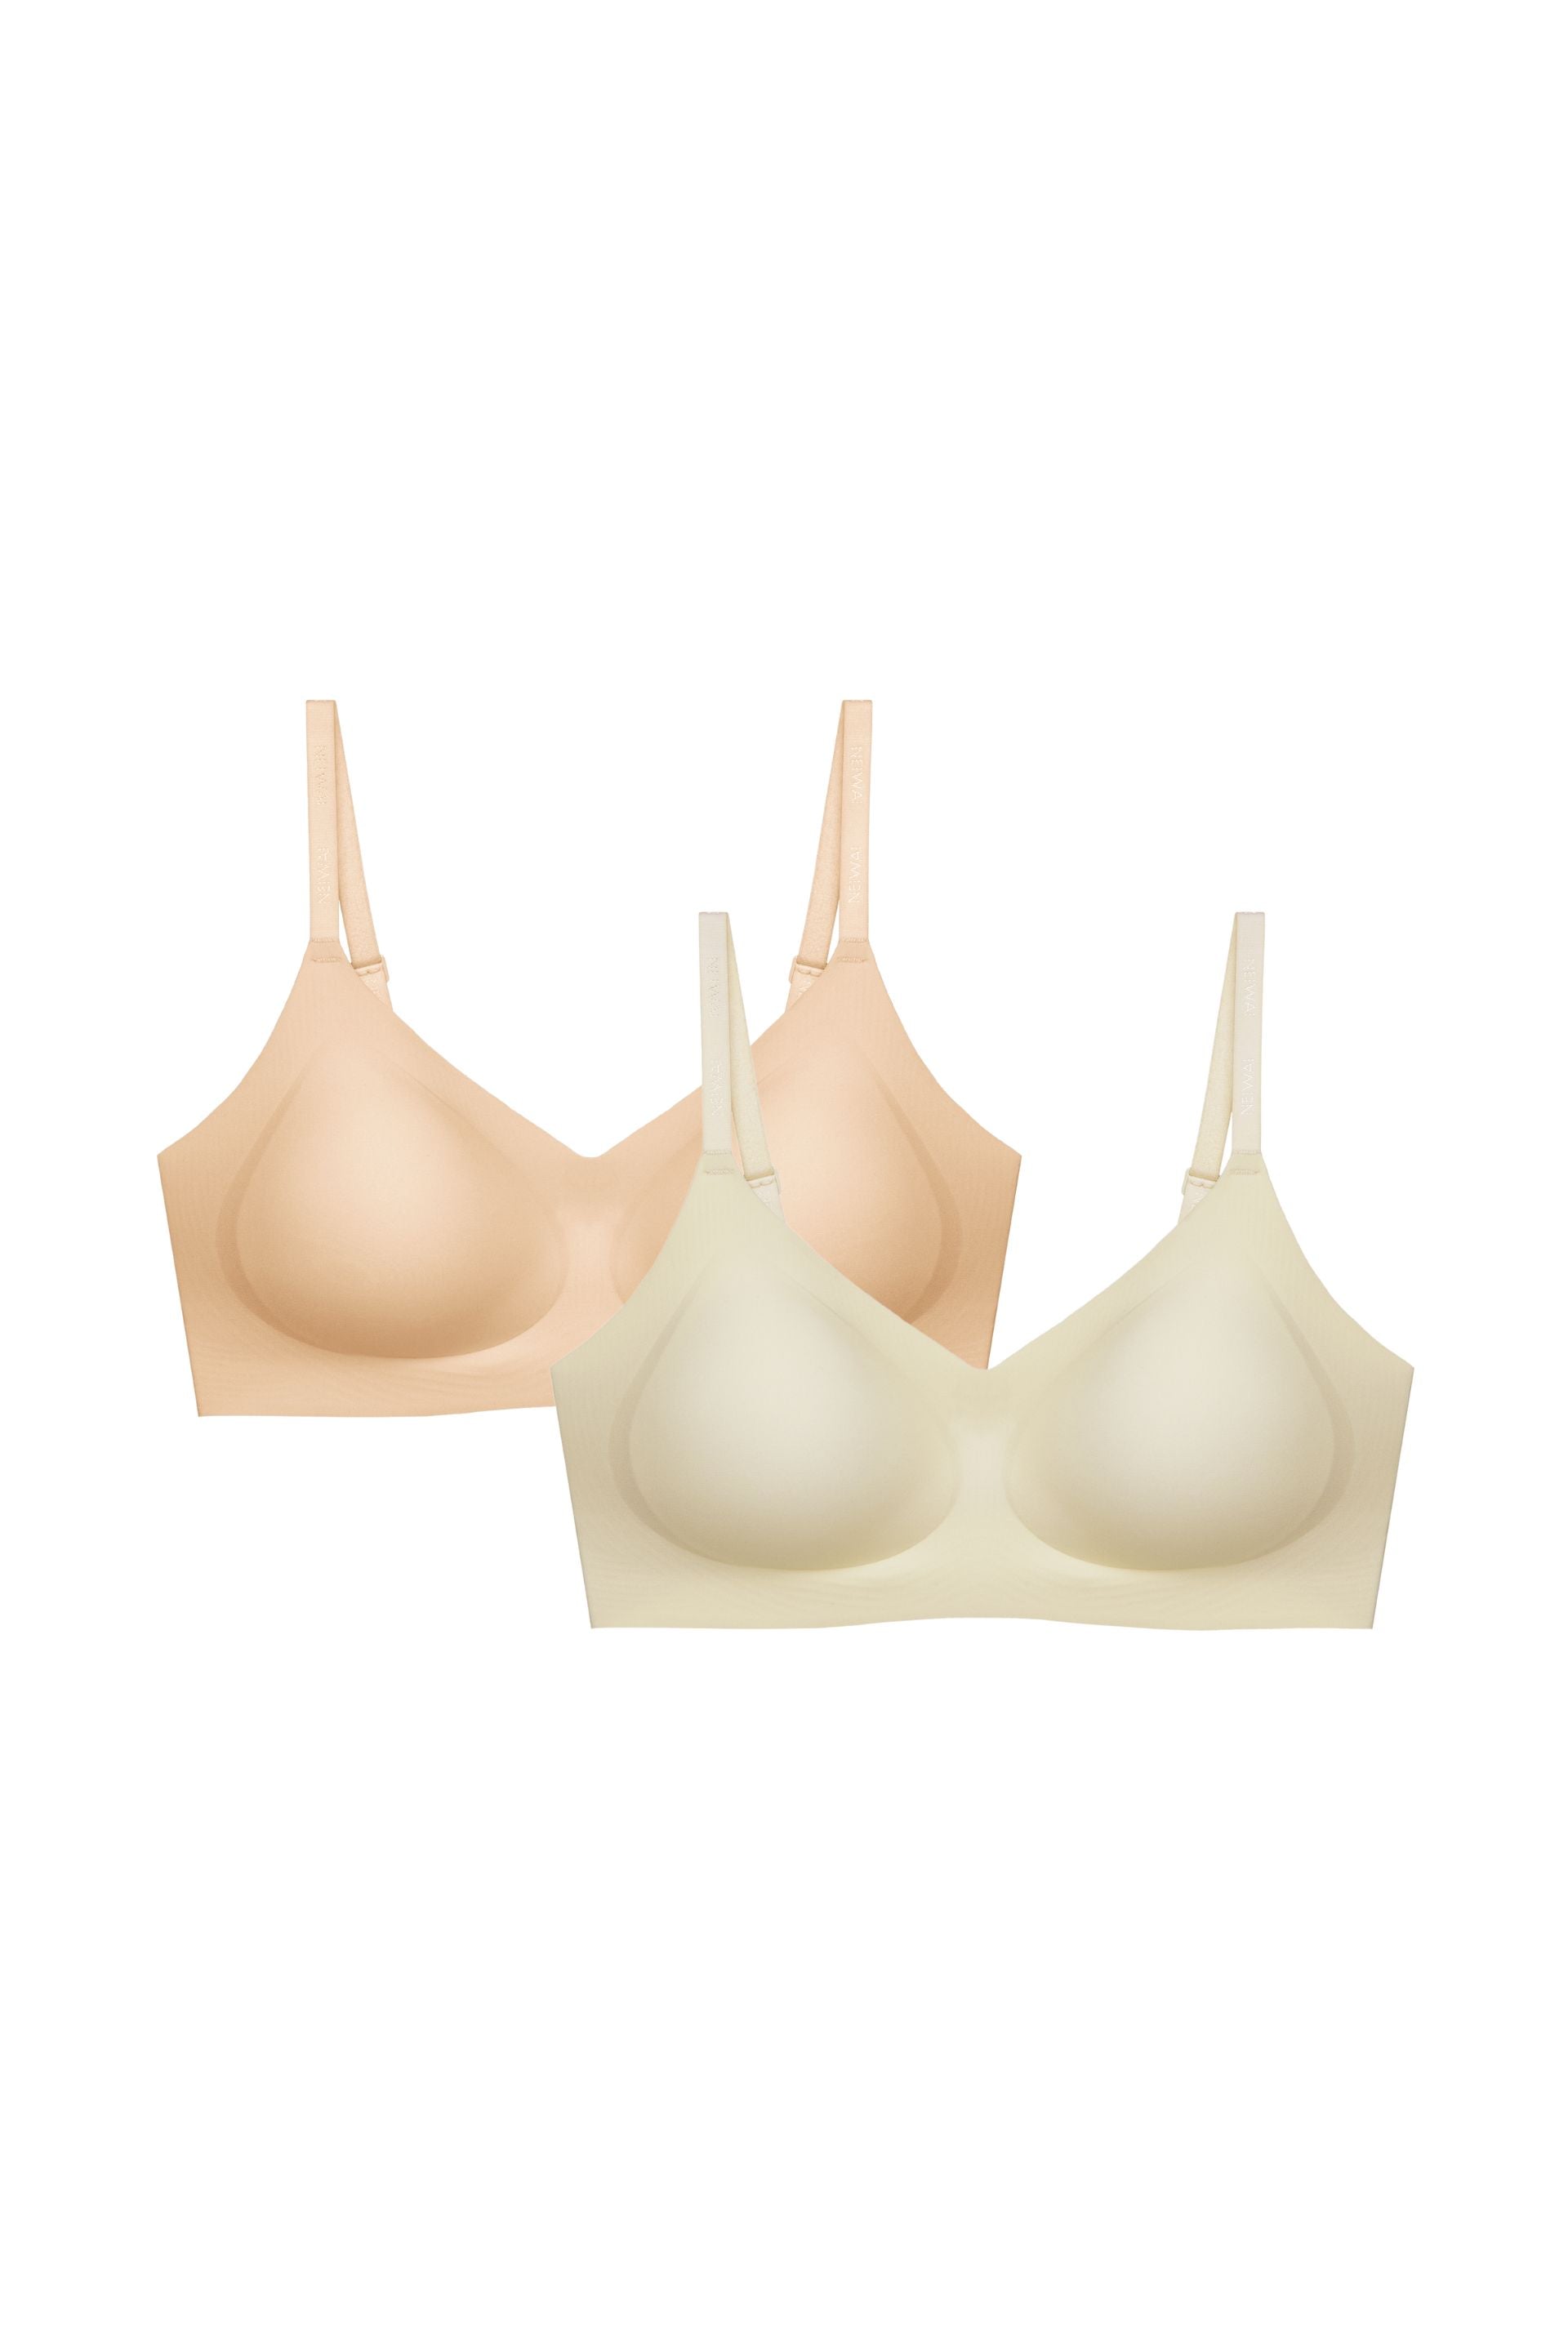 Pack of 2 Non-Wired T-Shirt Bras with Adjustable Straps